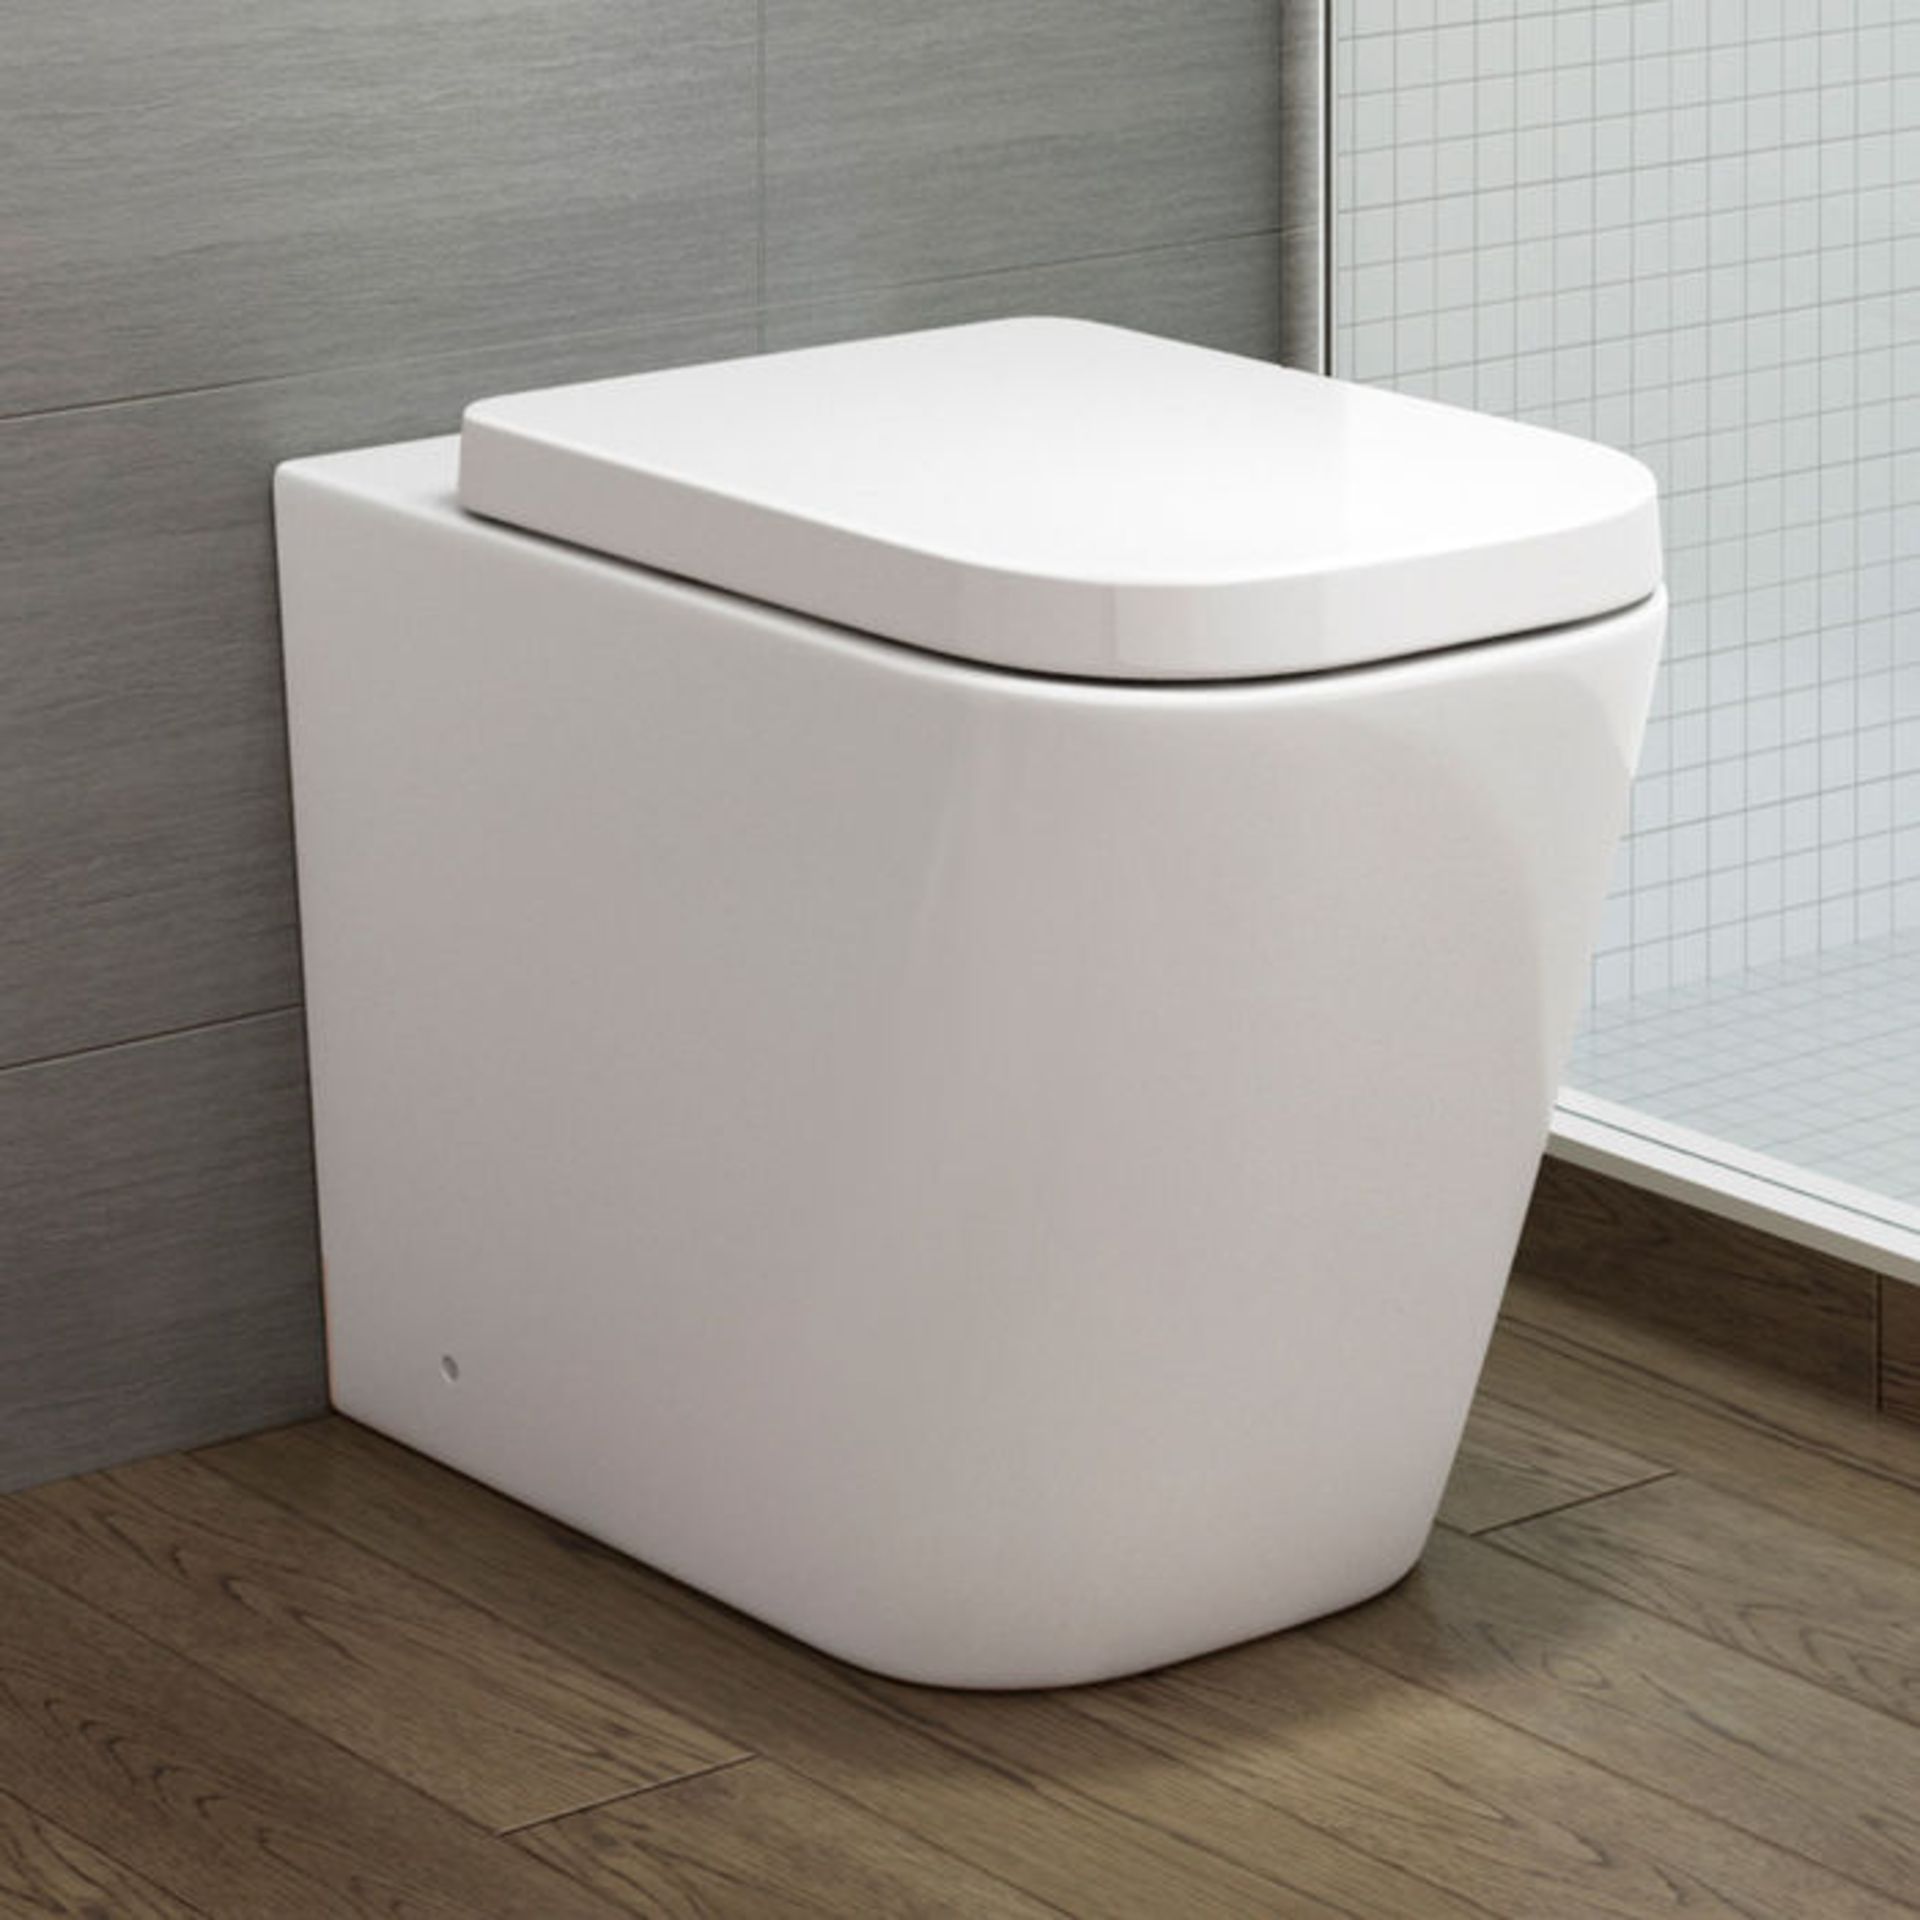 (S62) Florence Rimless Back to Wall Toilet inc Luxury Soft Close Seat RRP £349.99 Rimless design